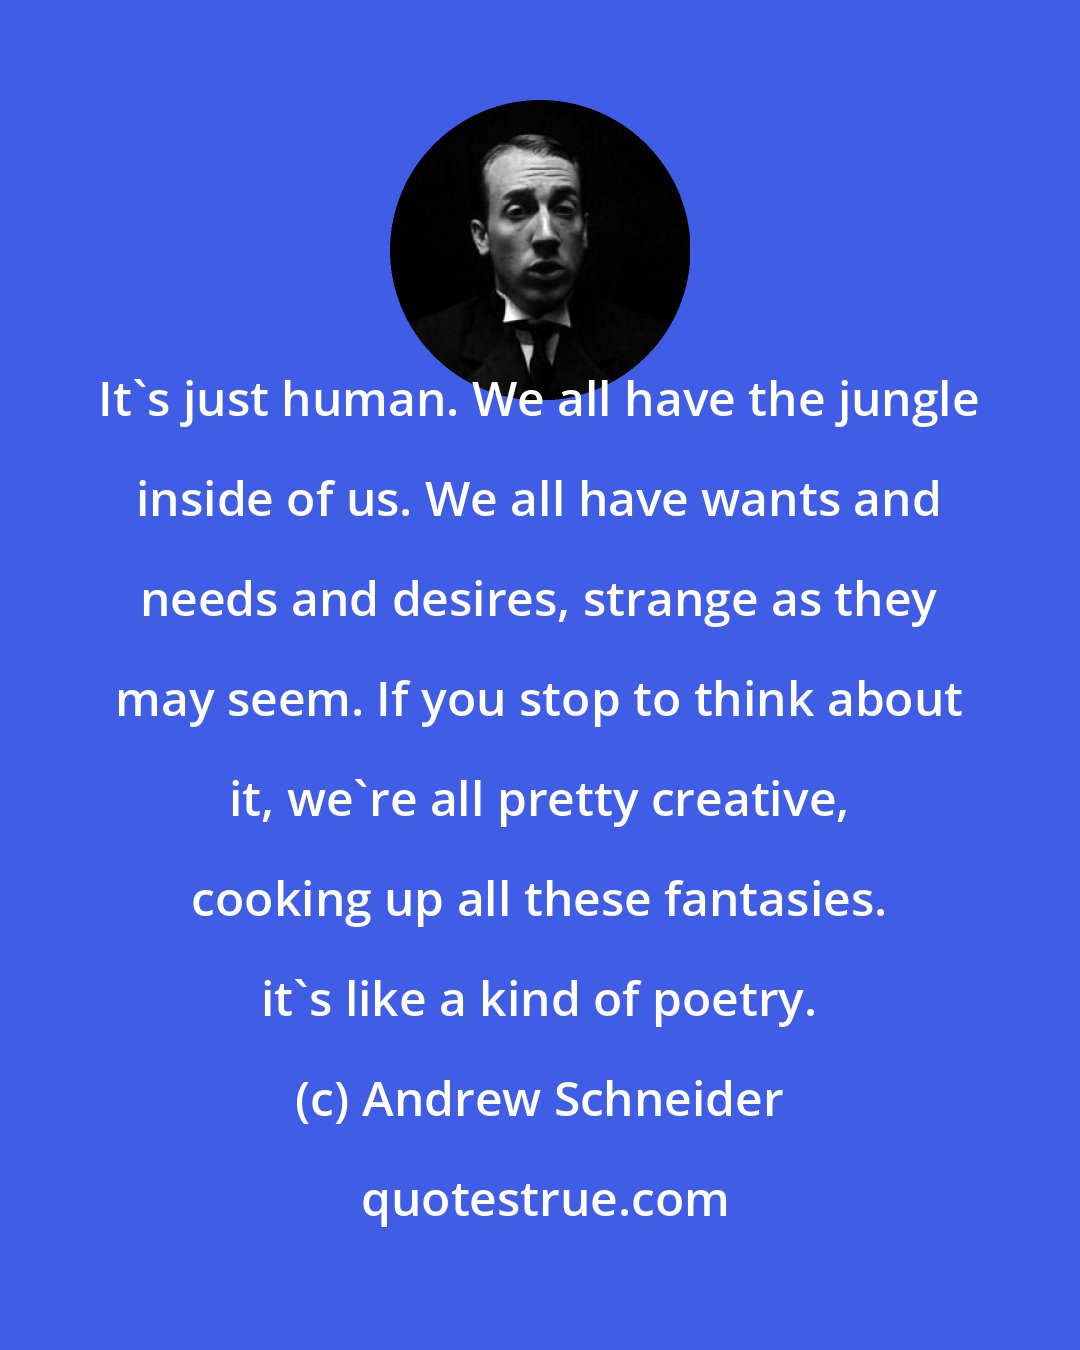 Andrew Schneider: It's just human. We all have the jungle inside of us. We all have wants and needs and desires, strange as they may seem. If you stop to think about it, we're all pretty creative, cooking up all these fantasies. it's like a kind of poetry.